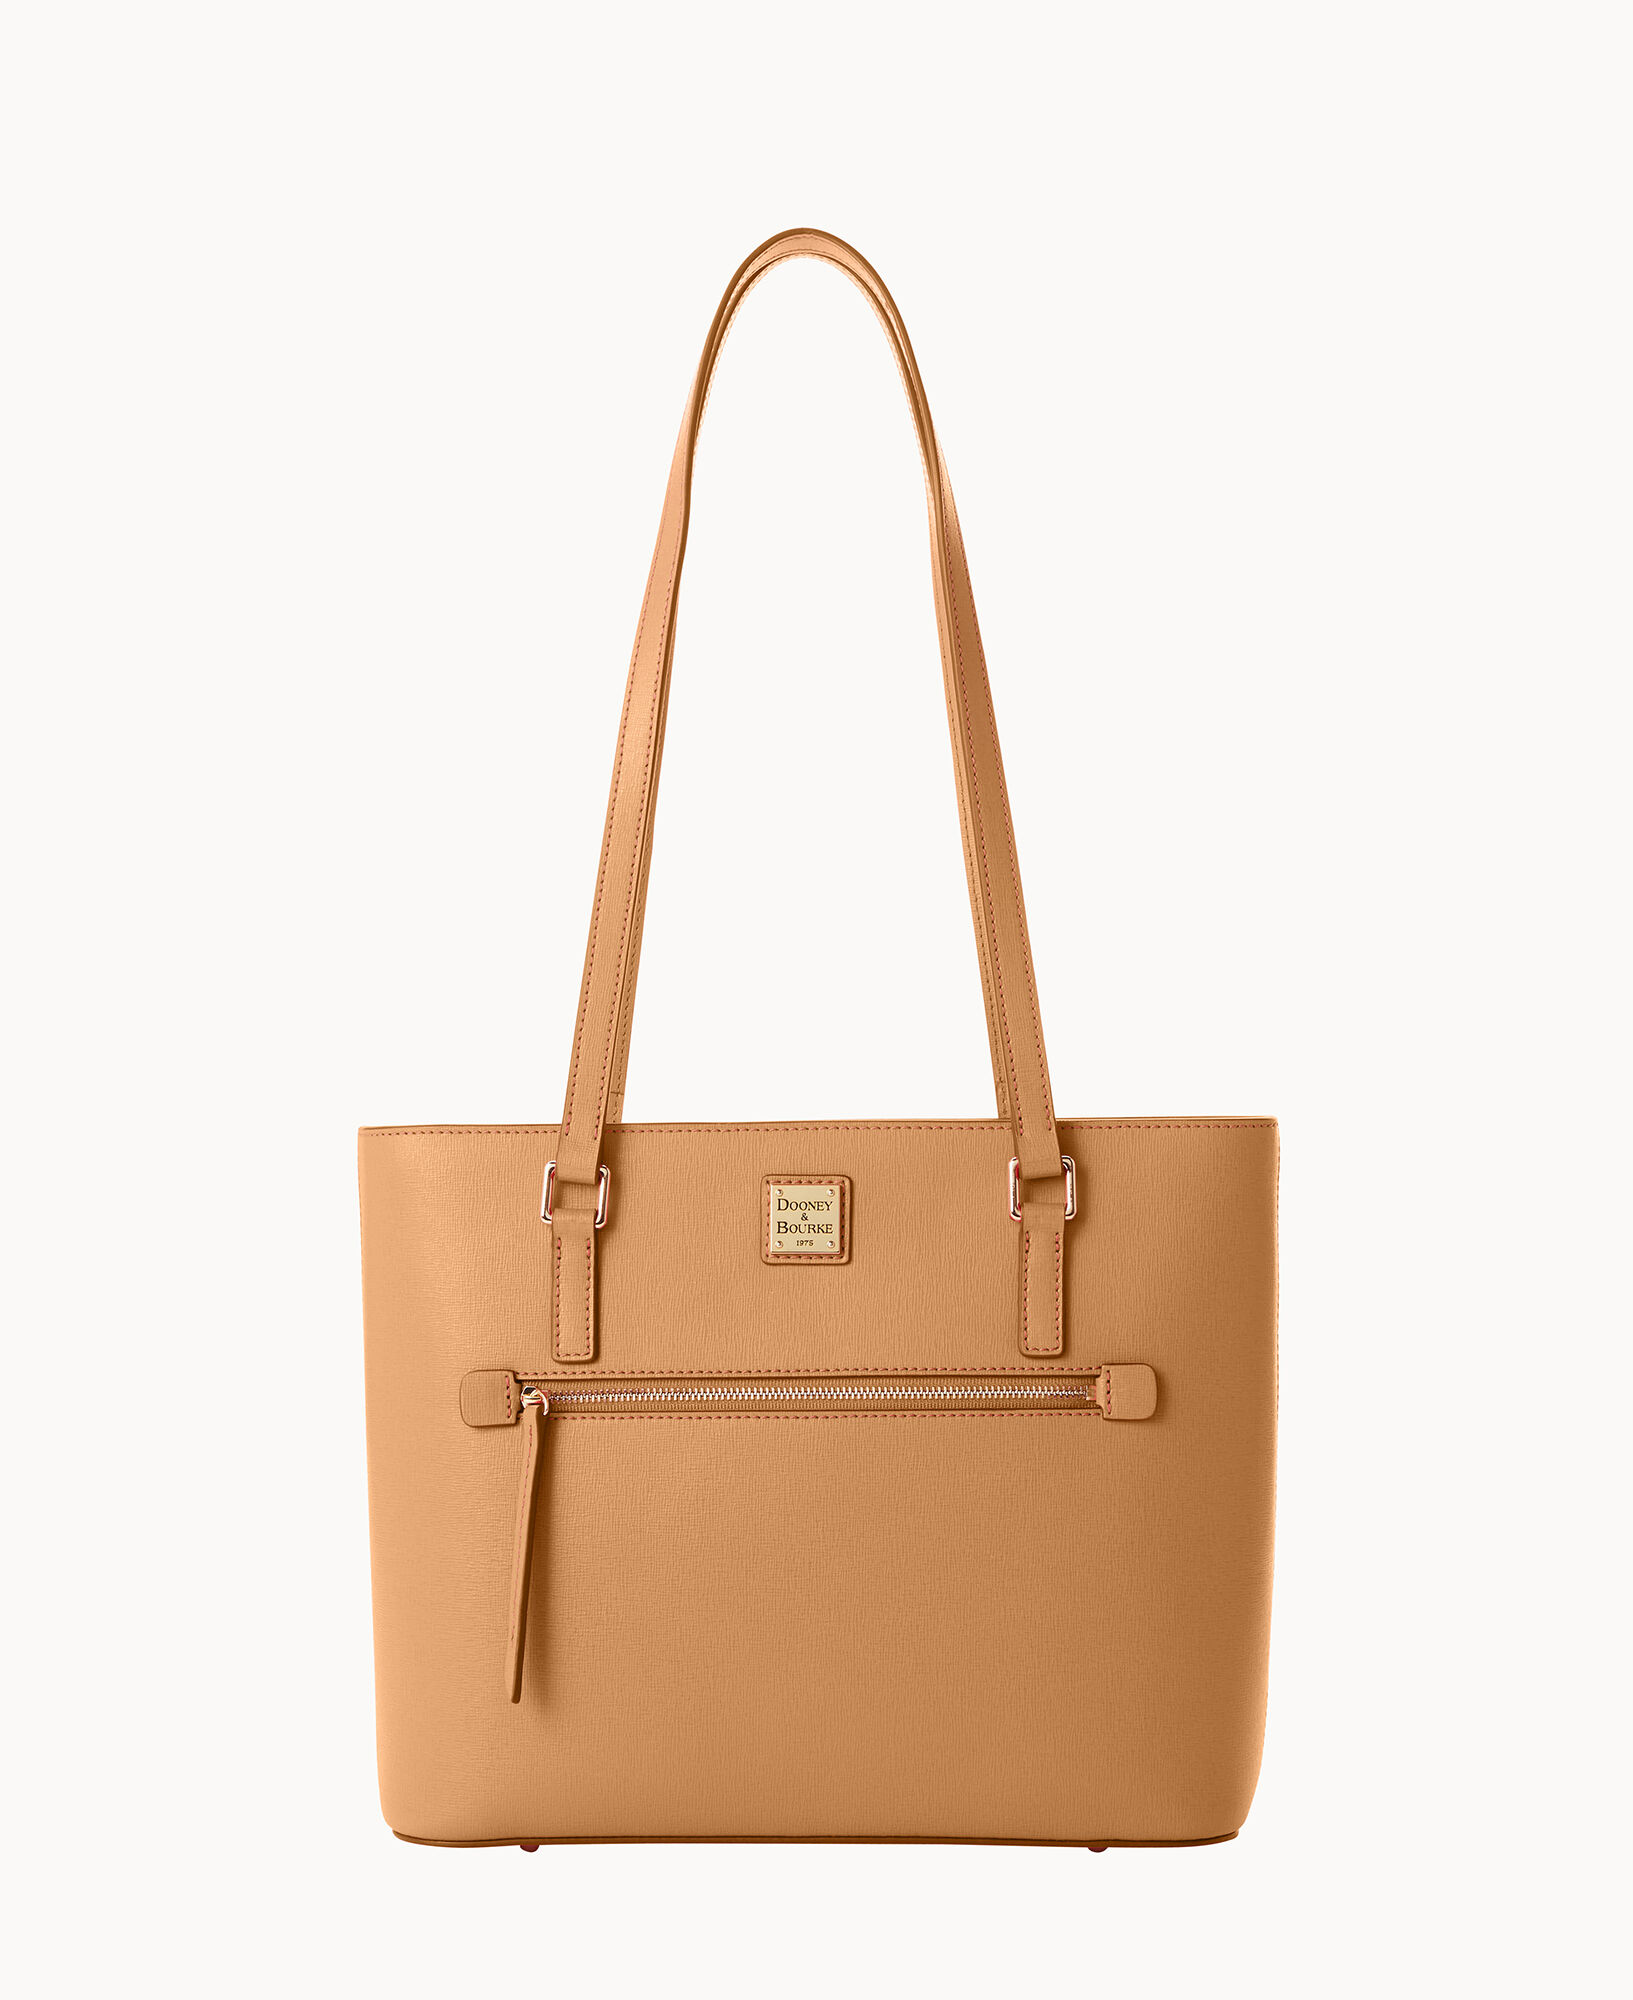 Dooney & Bourke Saffiano Leisure Shopper in Blush Color - $114 - From Emmie